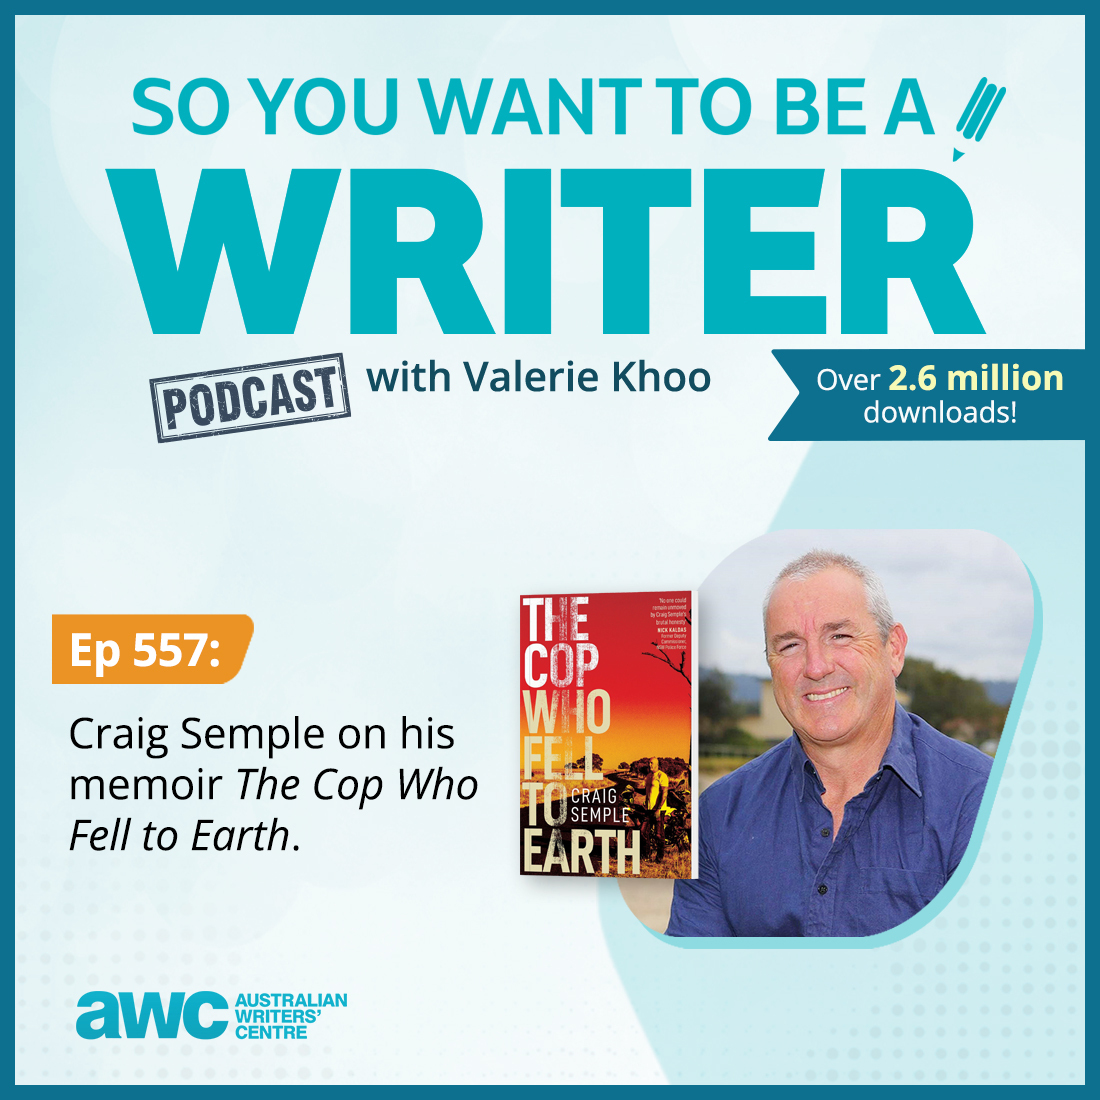 WRITER 557: Craig Semple on his memoir ’The Cop Who Fell to Earth’